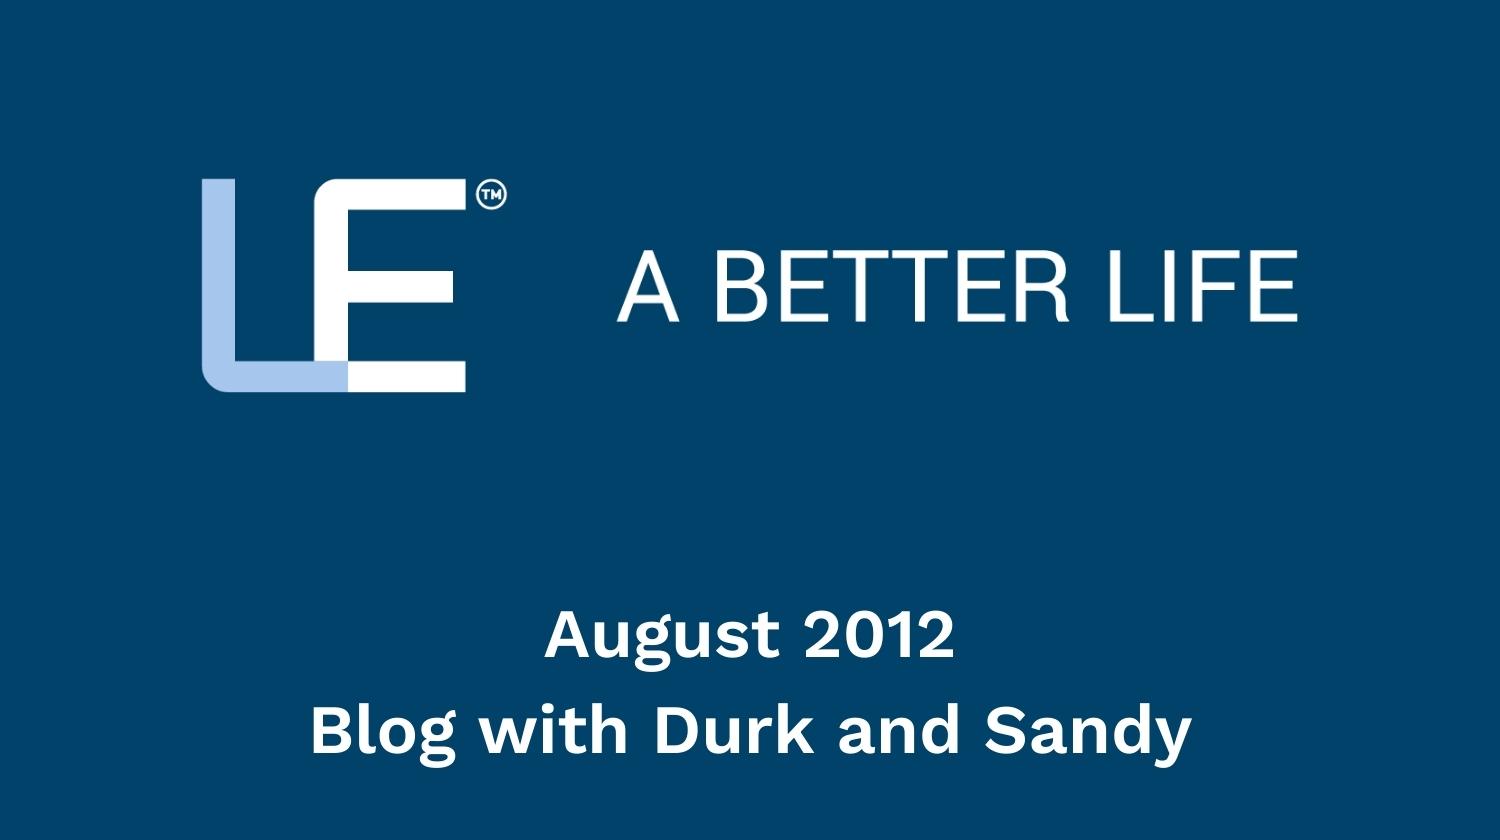 August 2012 Blog with Durk and Sandy